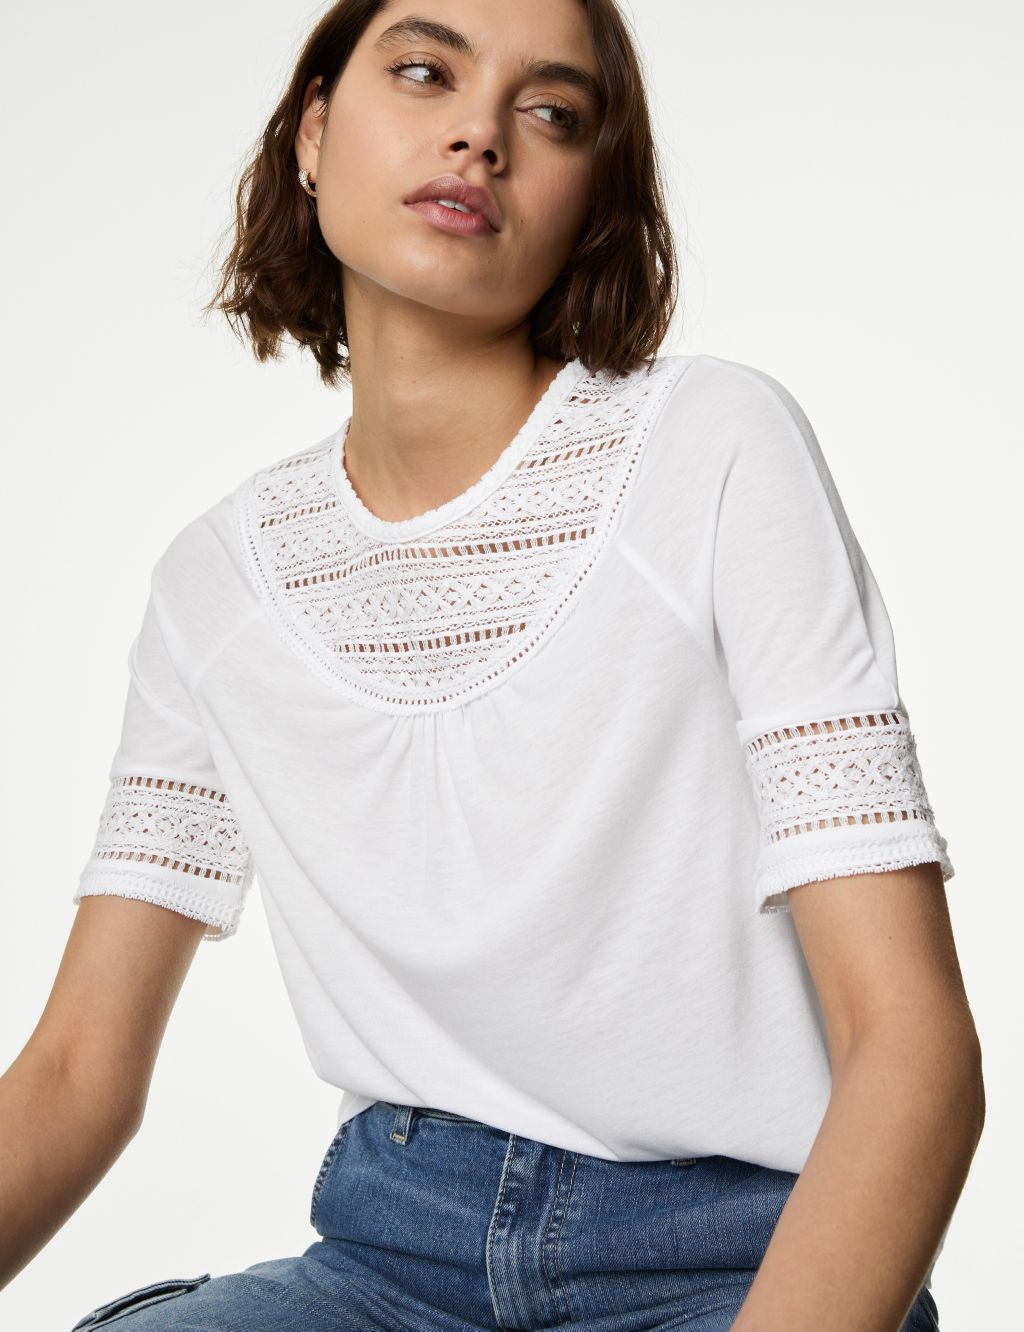 Jersey Lace Insert Top